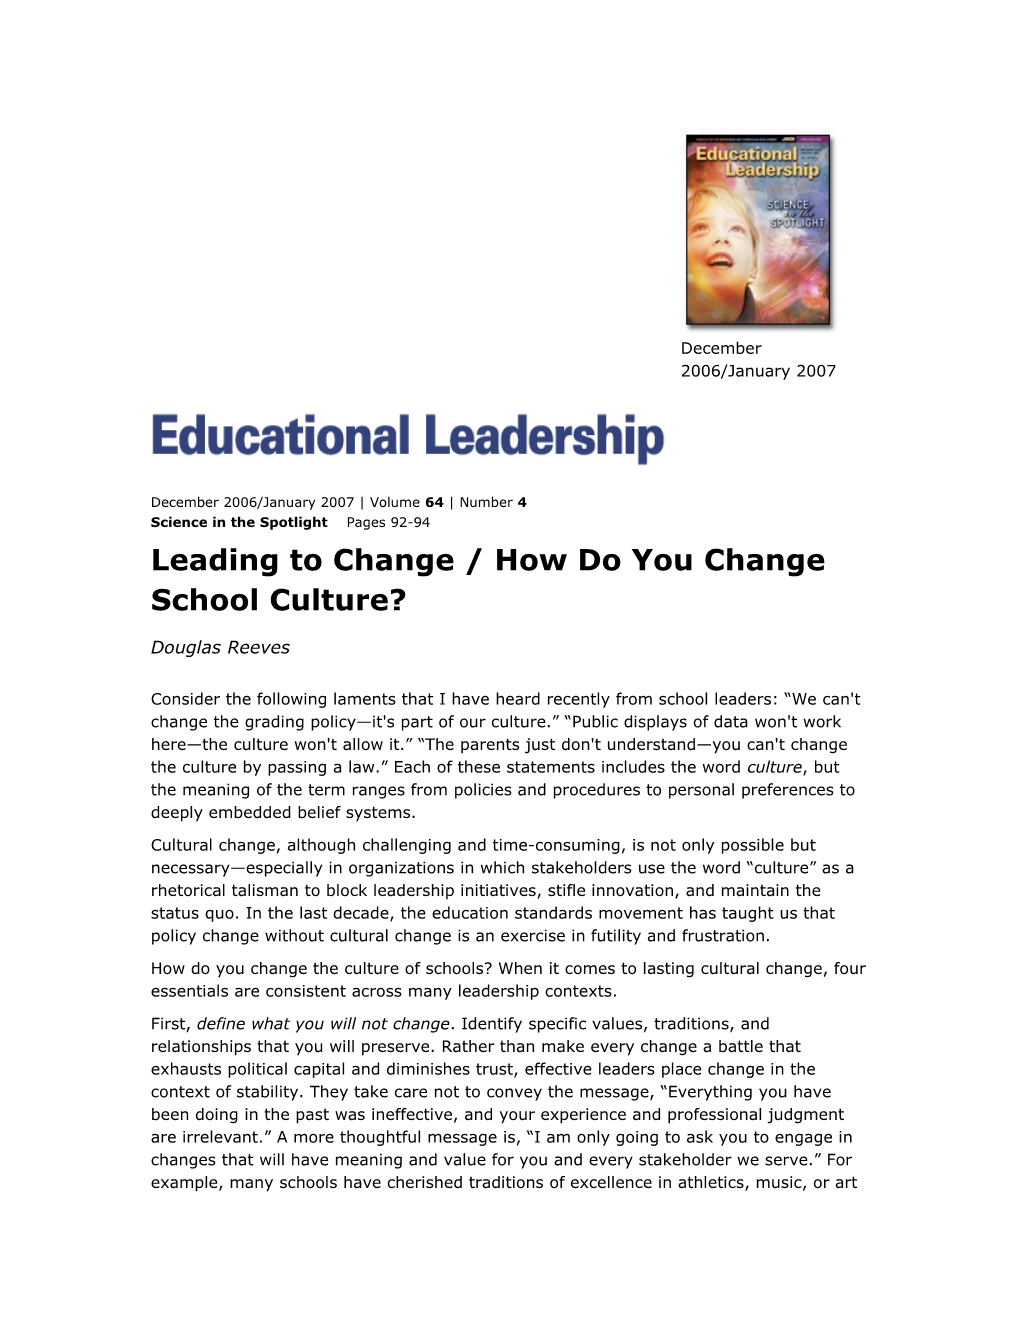 Leading to Change / How Do You Changeschool Culture?